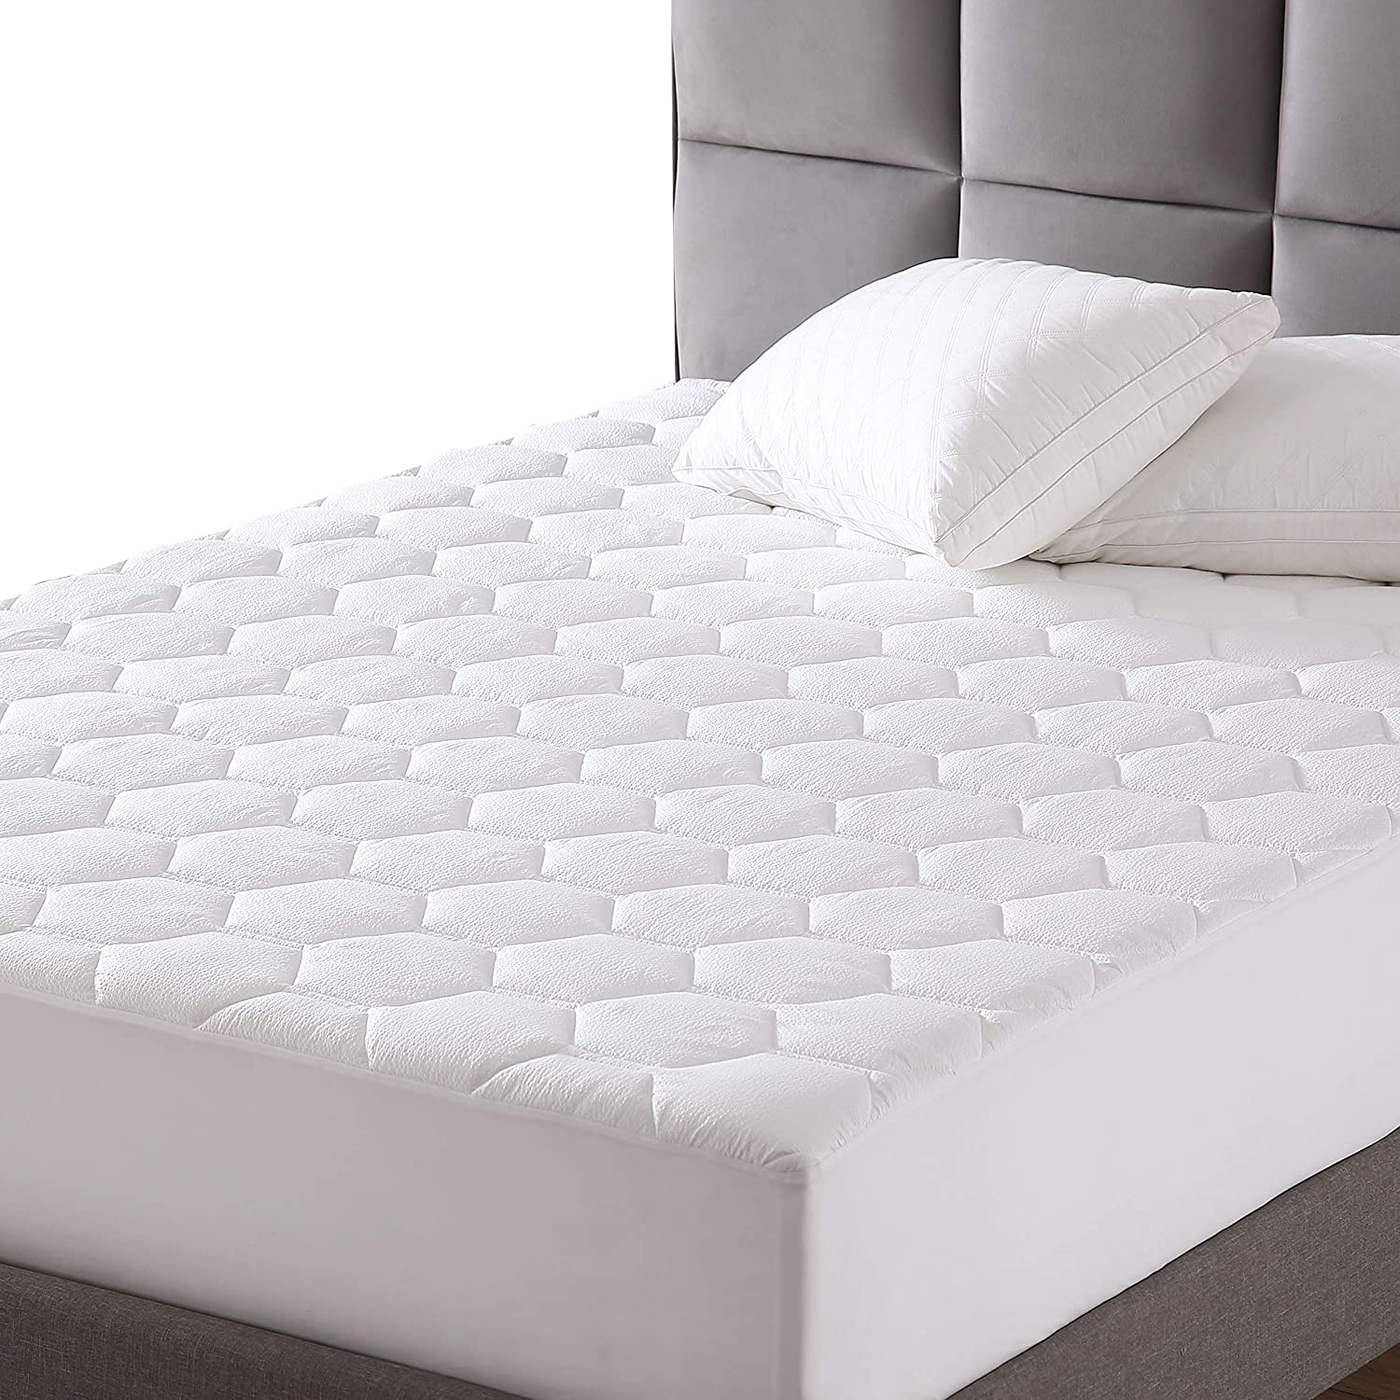 EXQ Home Mattree Cover Queen Size Bed (60x80 inches) Quilted Mattress Pad Protector Soft Queen Size Mattress Pad Fitted Sheet Stretch Up to 18” Deep Pocket (Breathable)